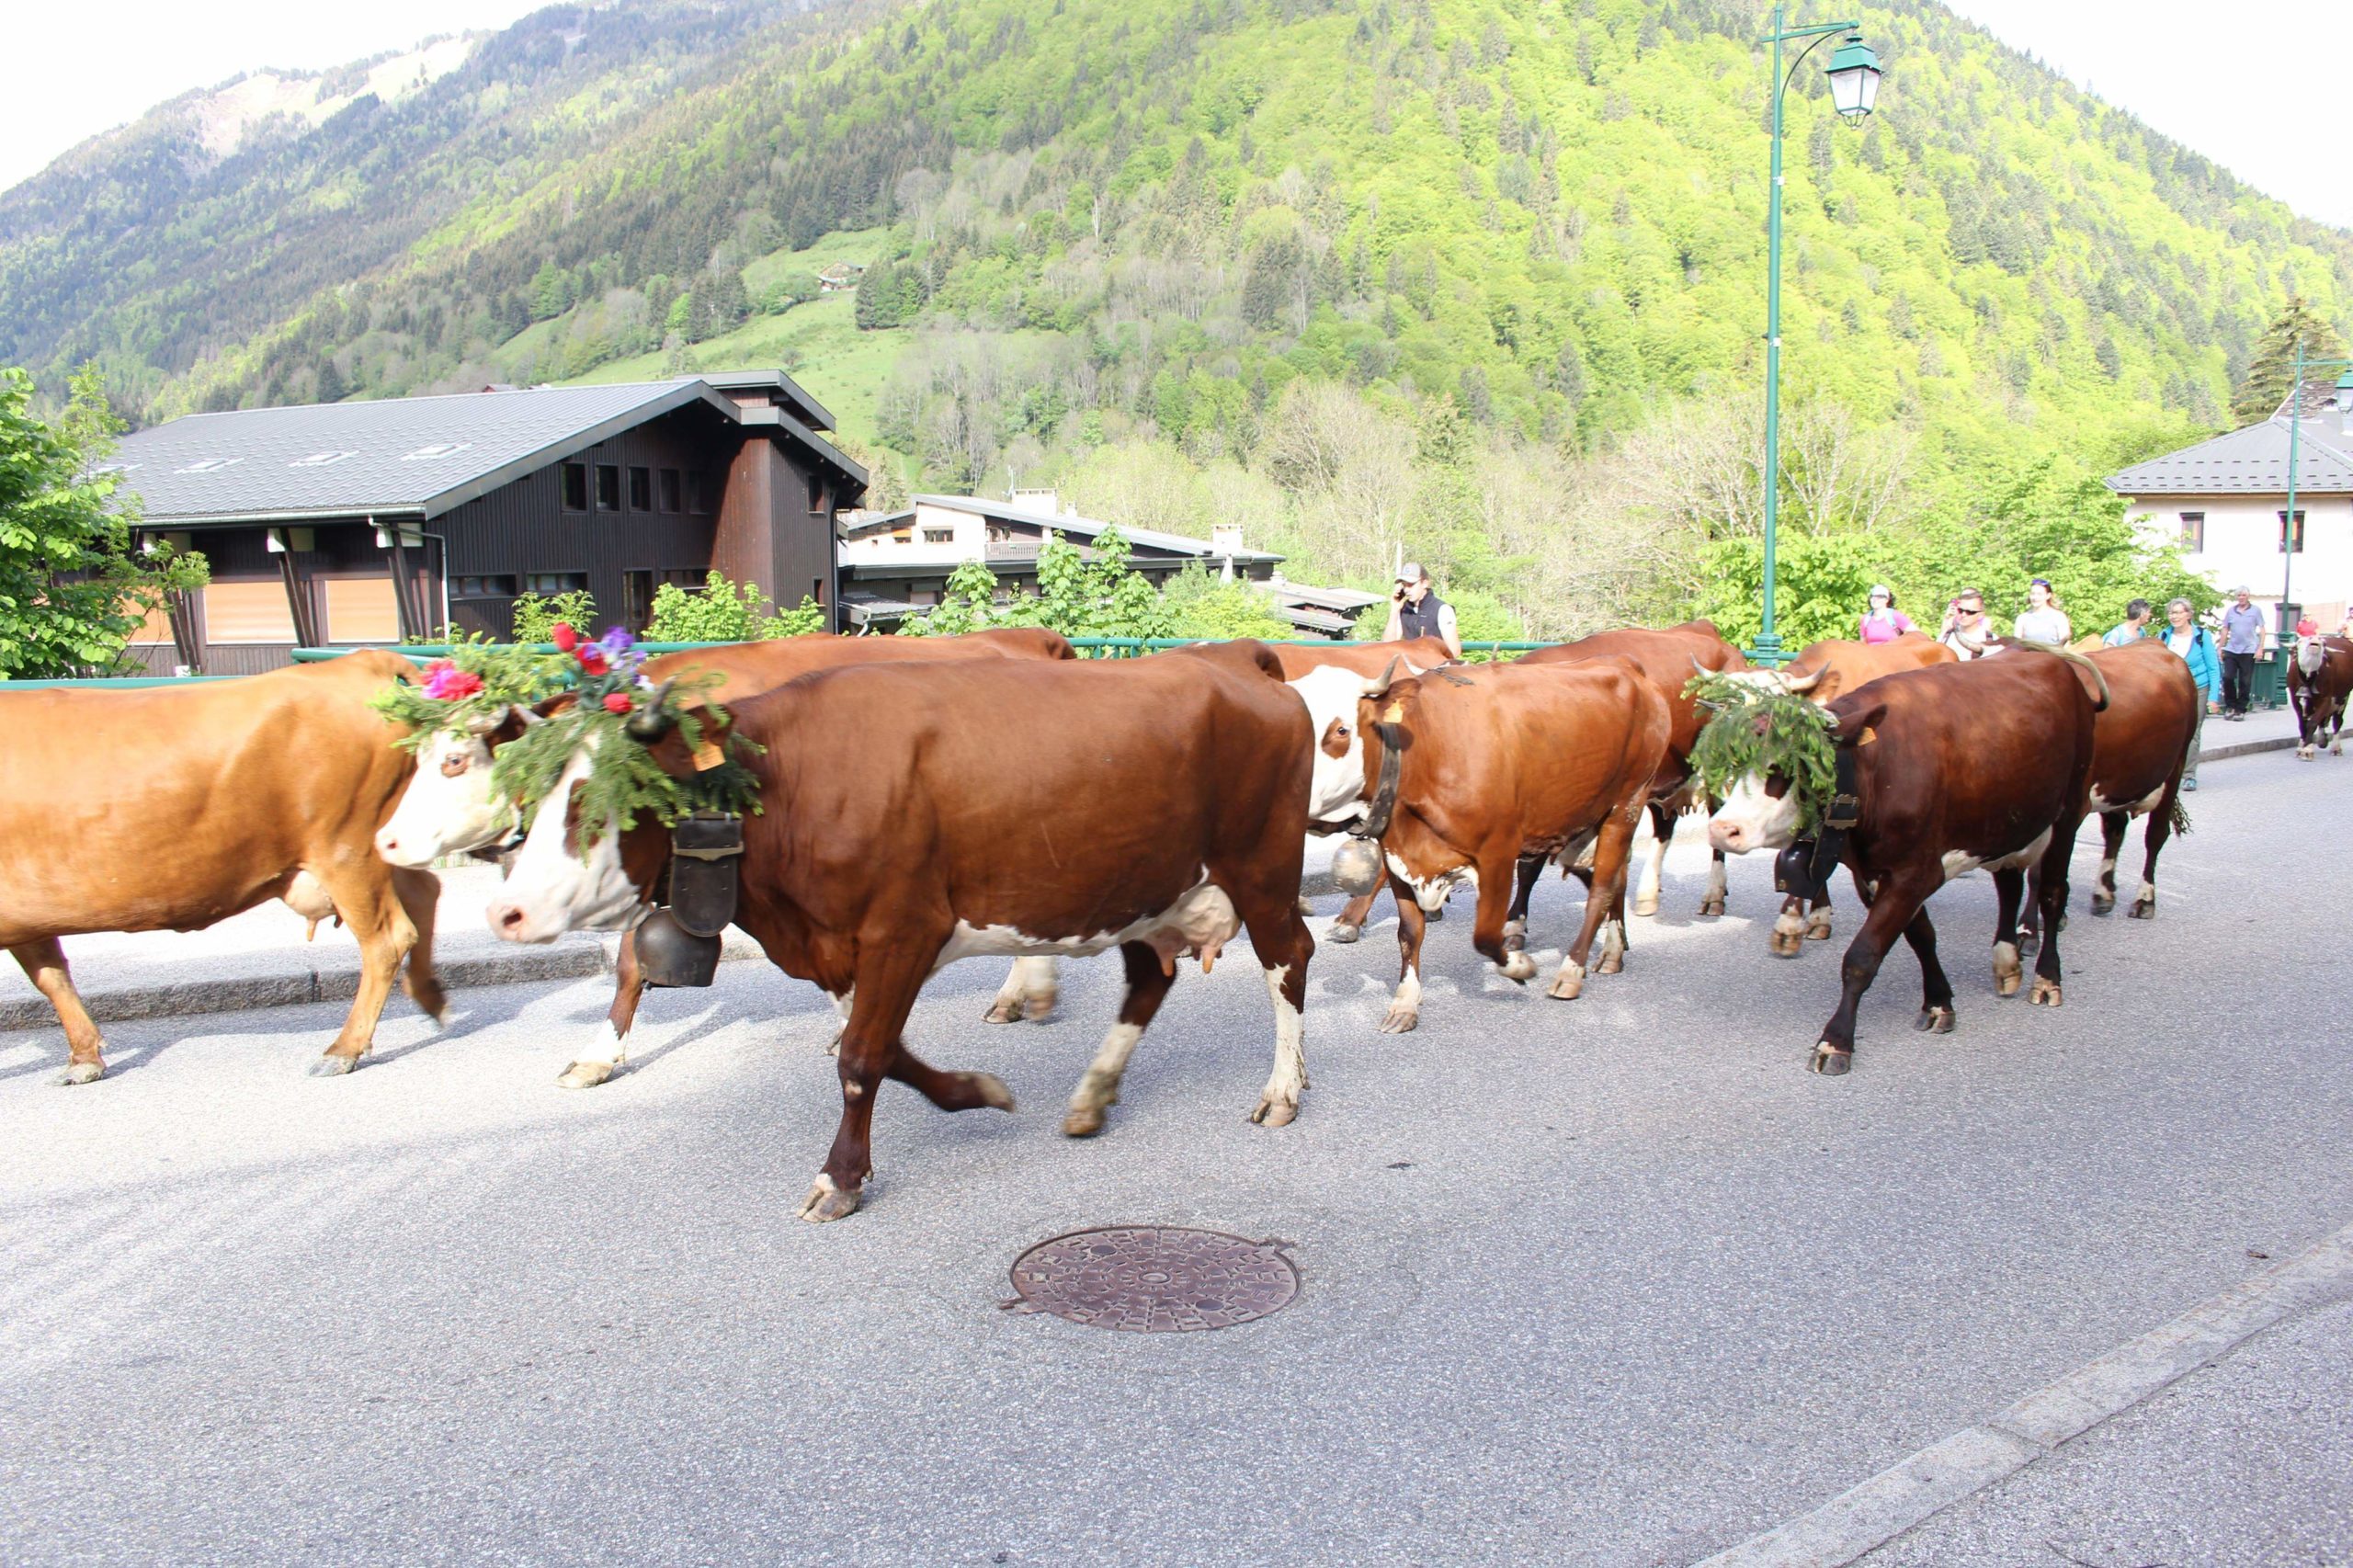 The March of the Cows – Transhumance